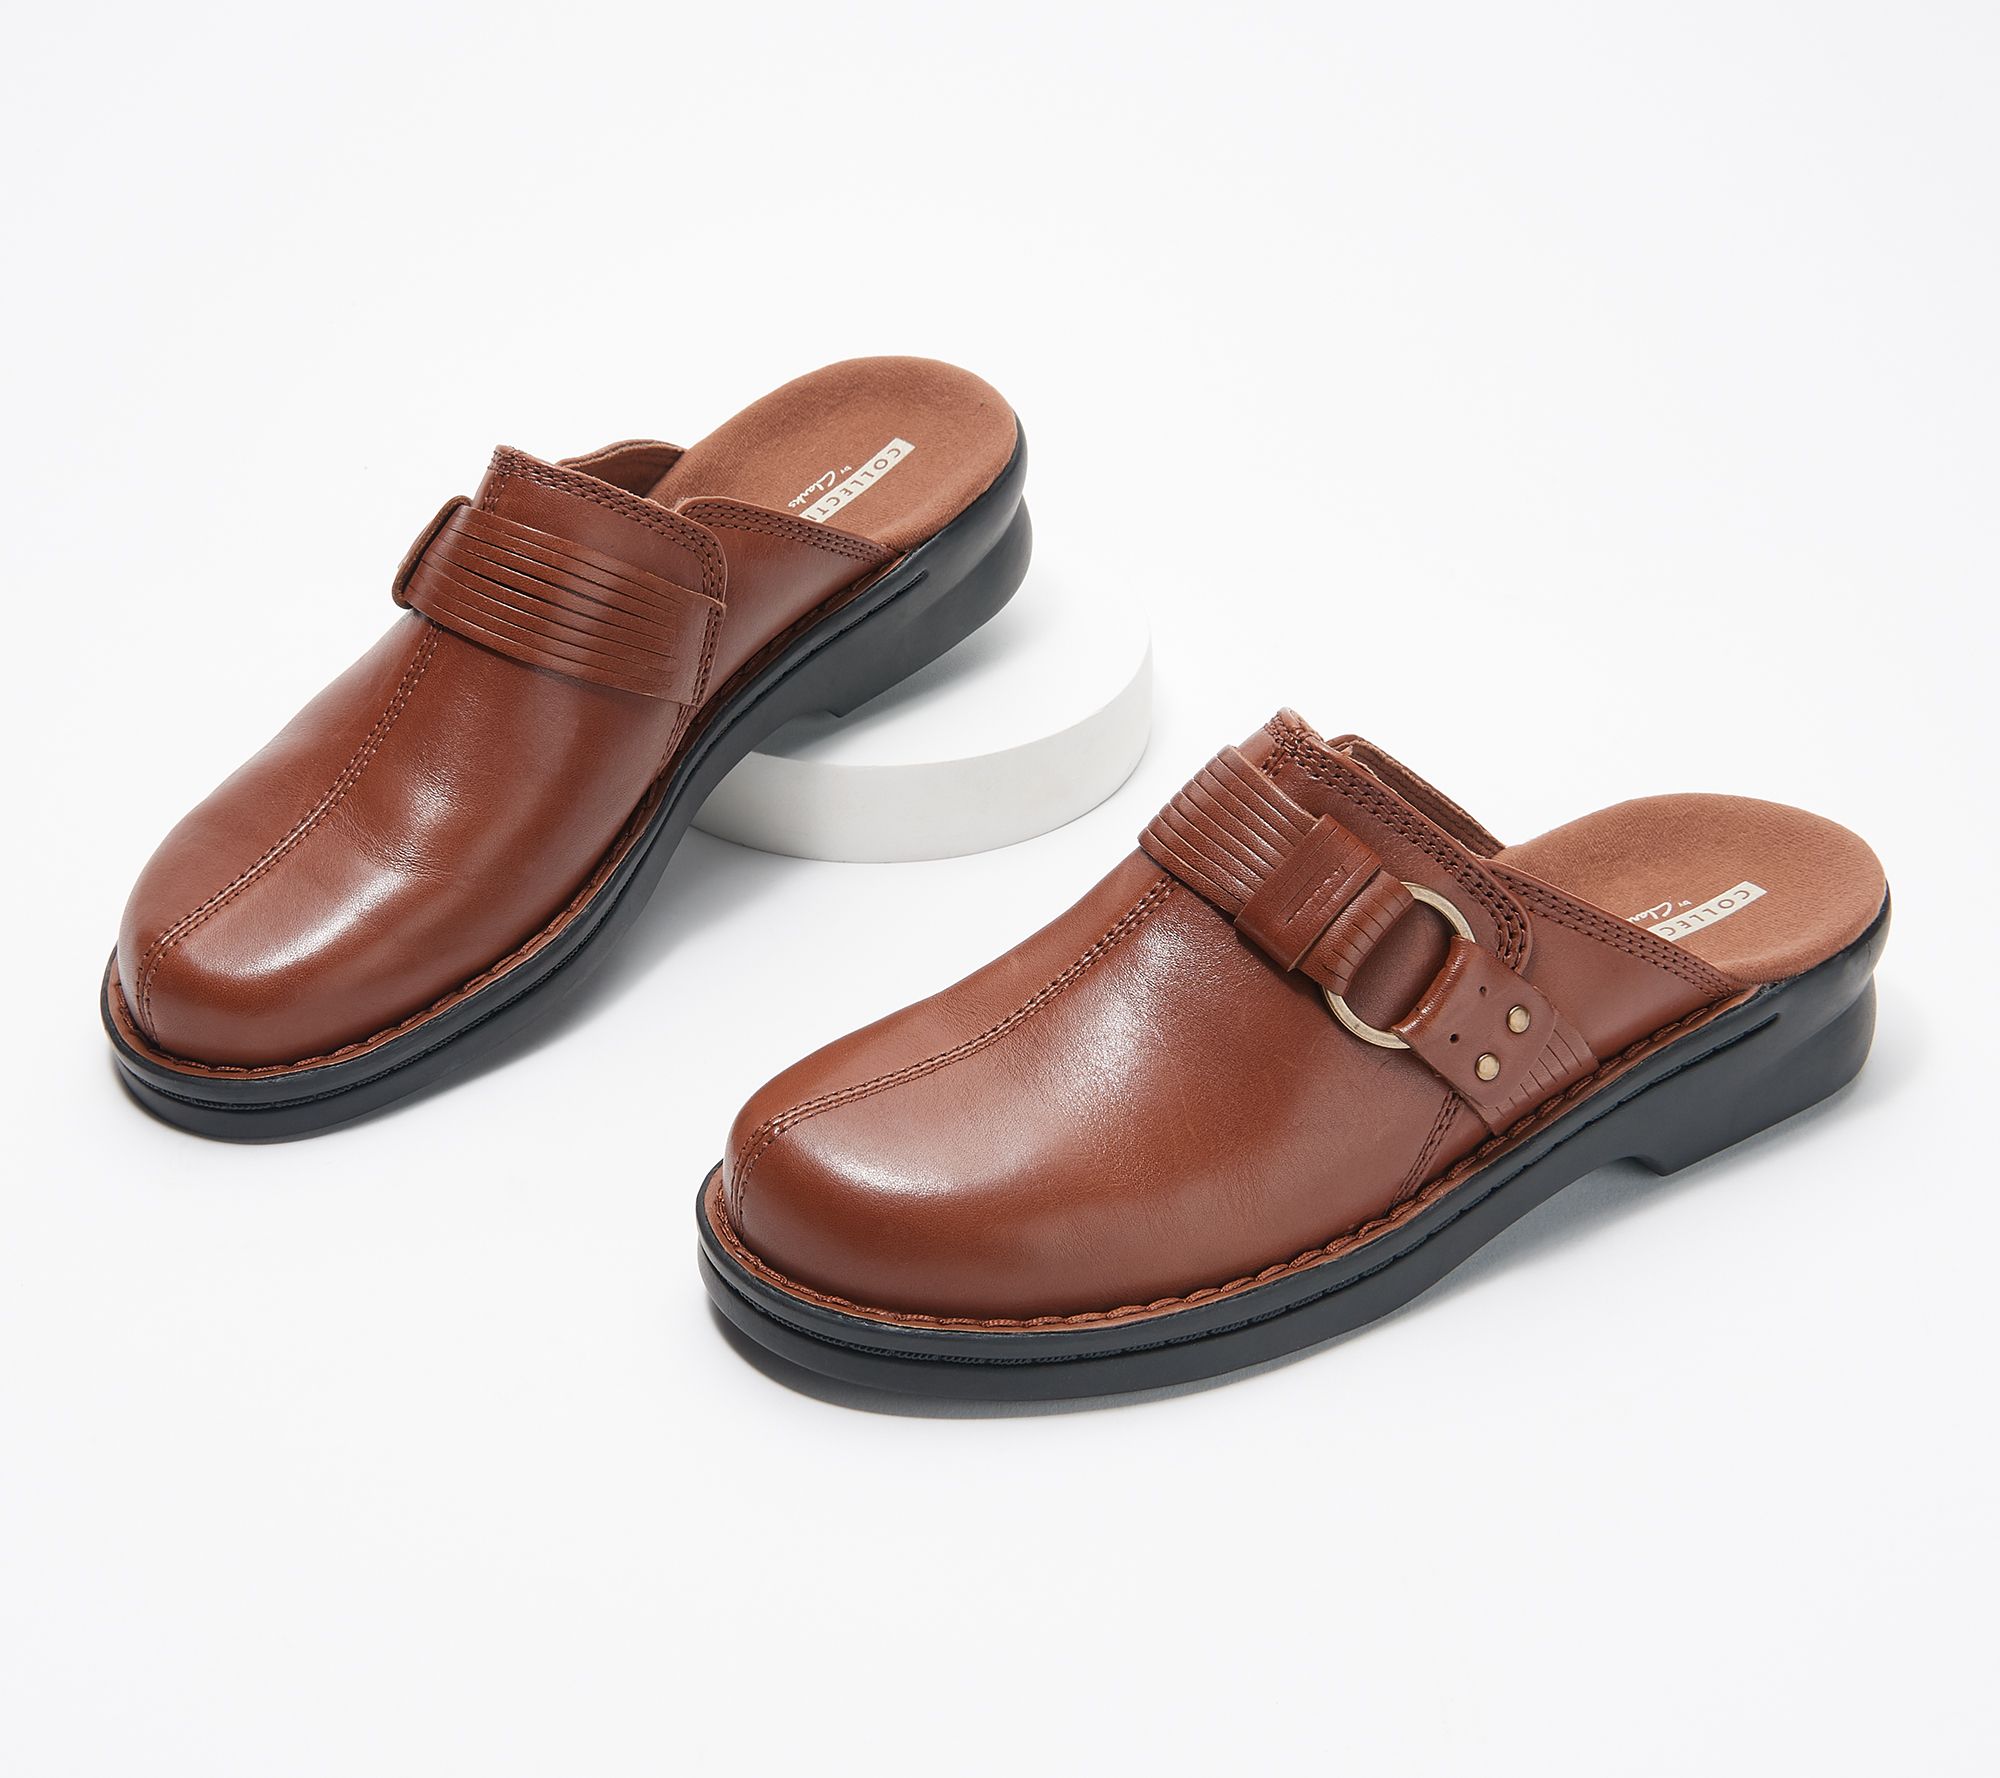 Clarks Collection Leather Slip-On Clogs - Patty - QVC.com